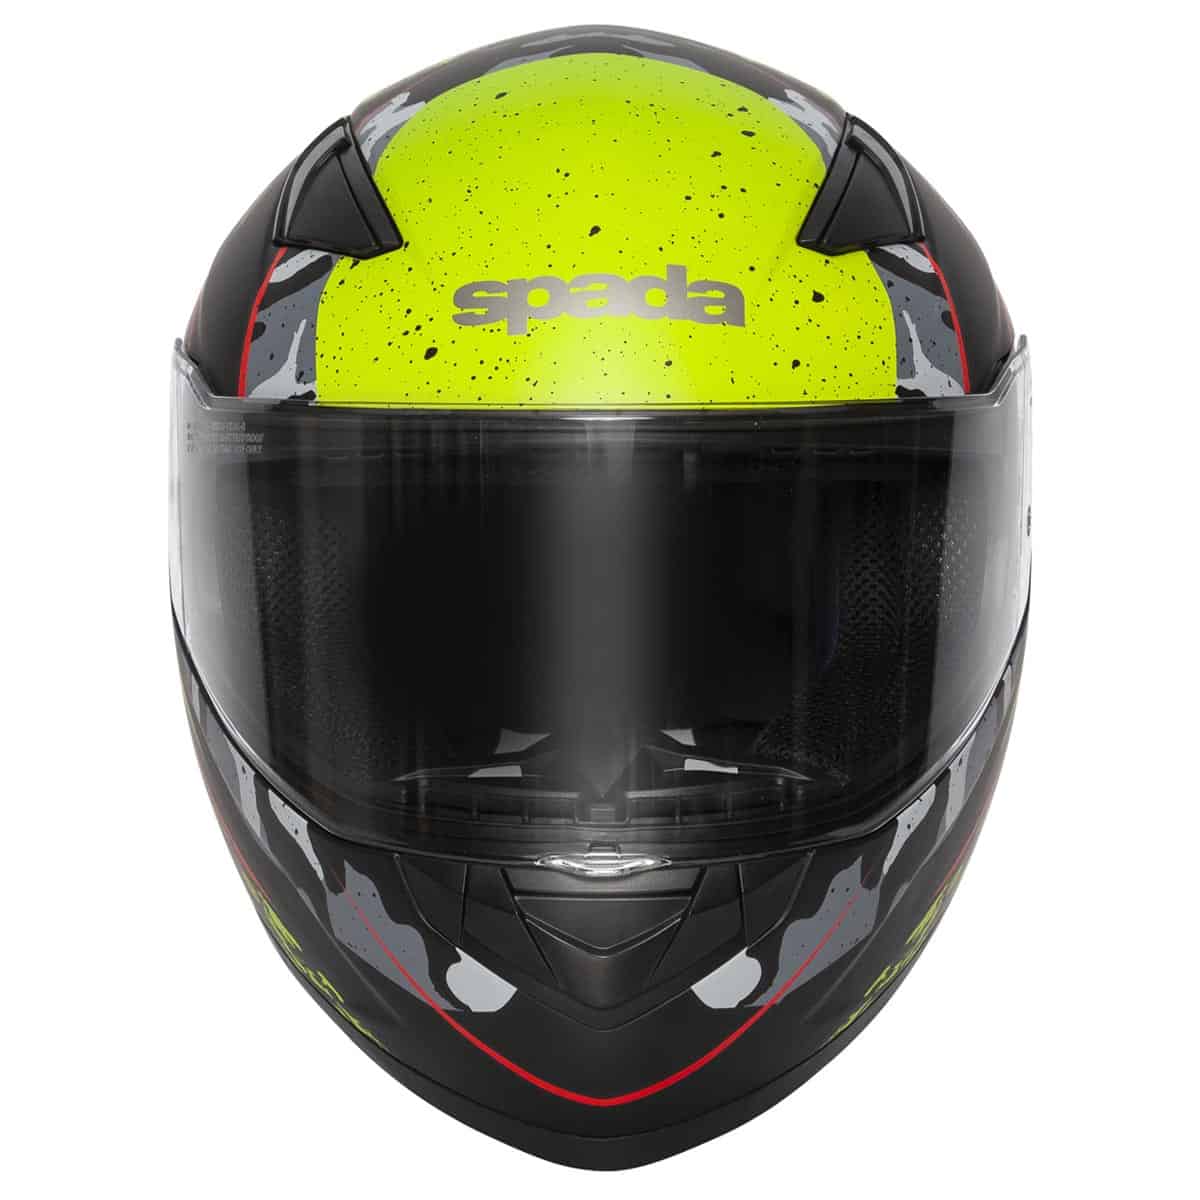 Spada Raiden Camo Helmet: Entry level full face motorcycle helmet. The Spada Raiden motorcycle helmet is perfect for bikers who have just started out riding or who need a full face helmet which doesn't break the bank. 